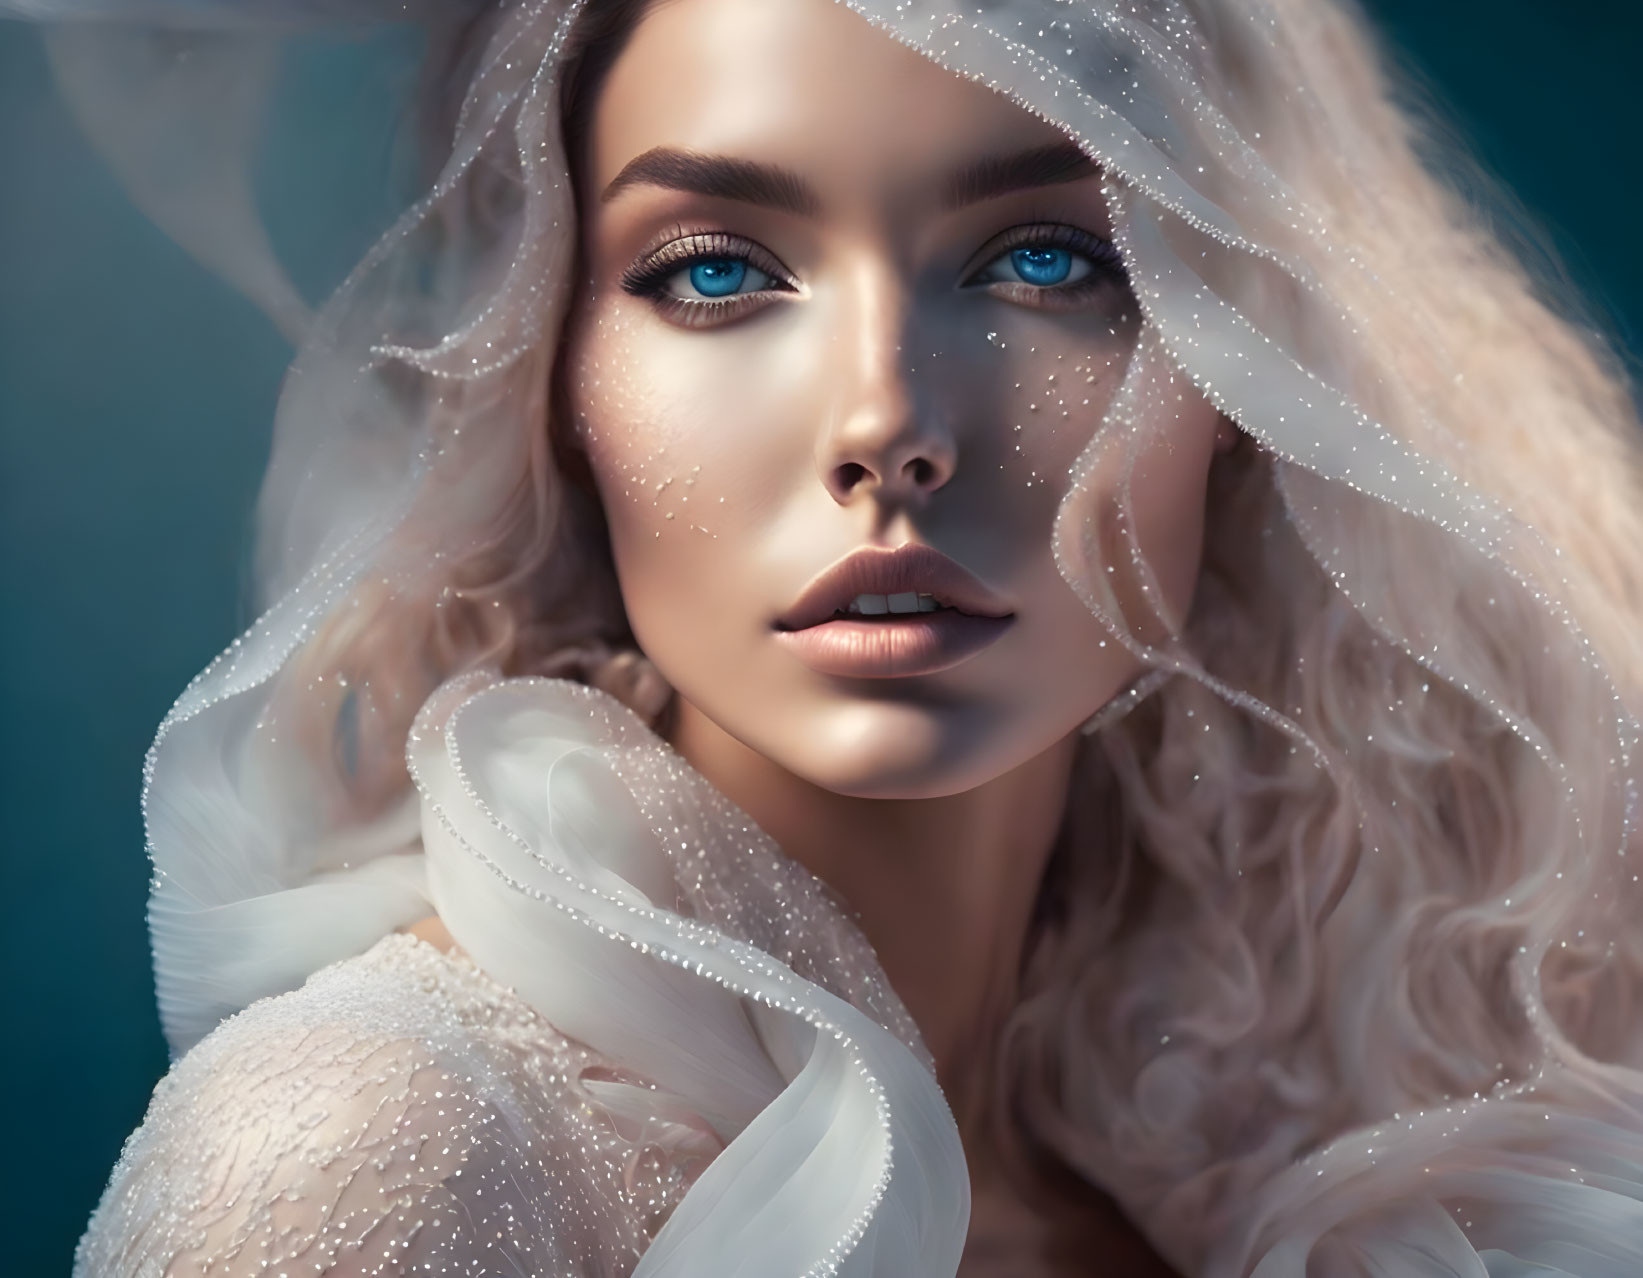 Portrait of Woman with Blue Eyes and Translucent Fabric